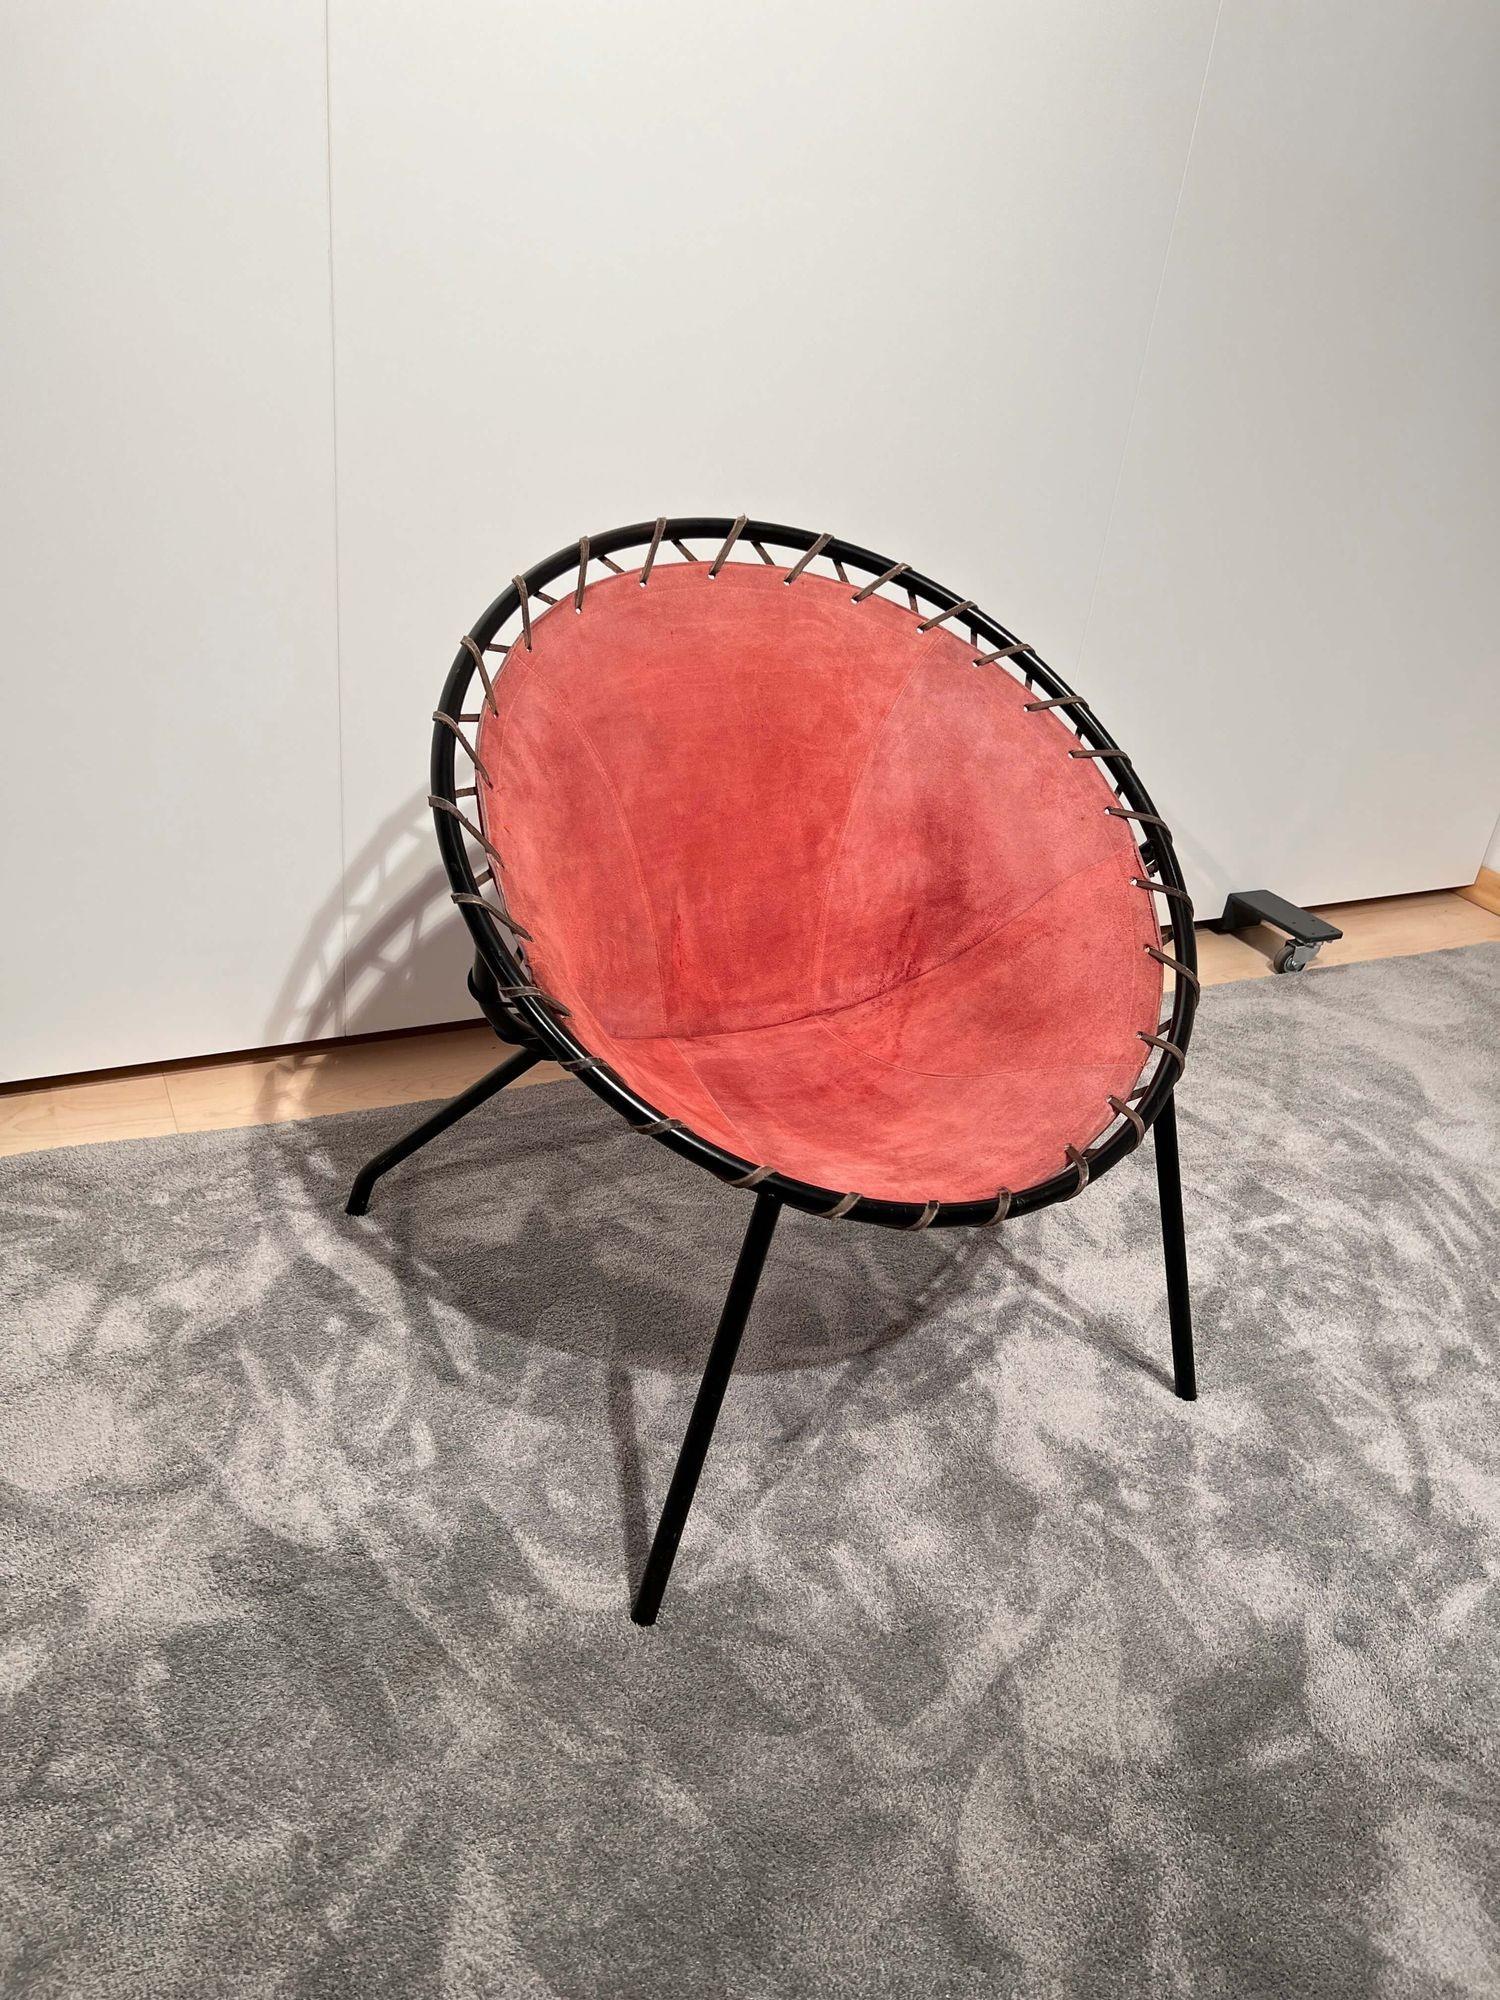 Rare red single ‚Balloon’ lounge chair by Hans Olsen.
Design: Hans Olsen, 1955 for Lea Design
Original red suede leather. Black lacquered metal frame. All around leather strips. Oiled solid teak armrests.
Dimensions: H 71 cm x B 71 cm x T 58 cm x